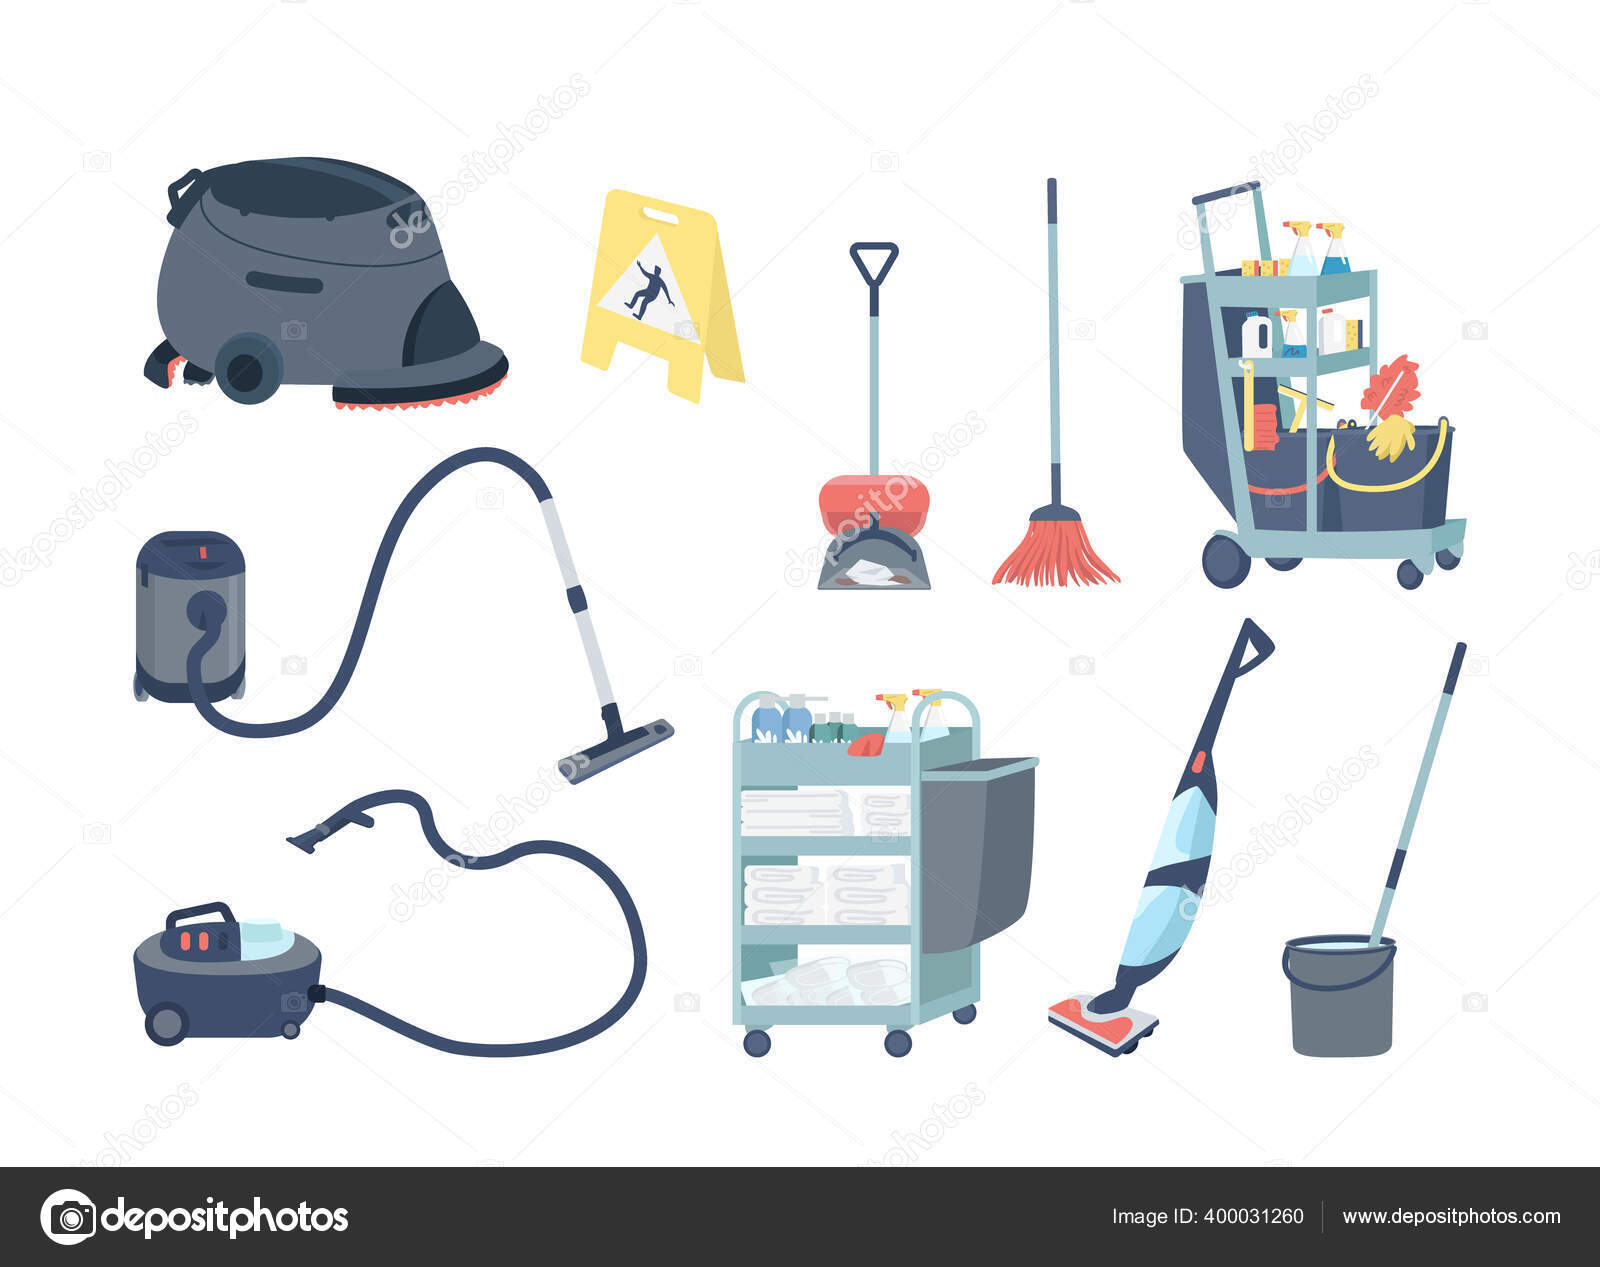 Janitorial Supplies, Cleaning Equipment